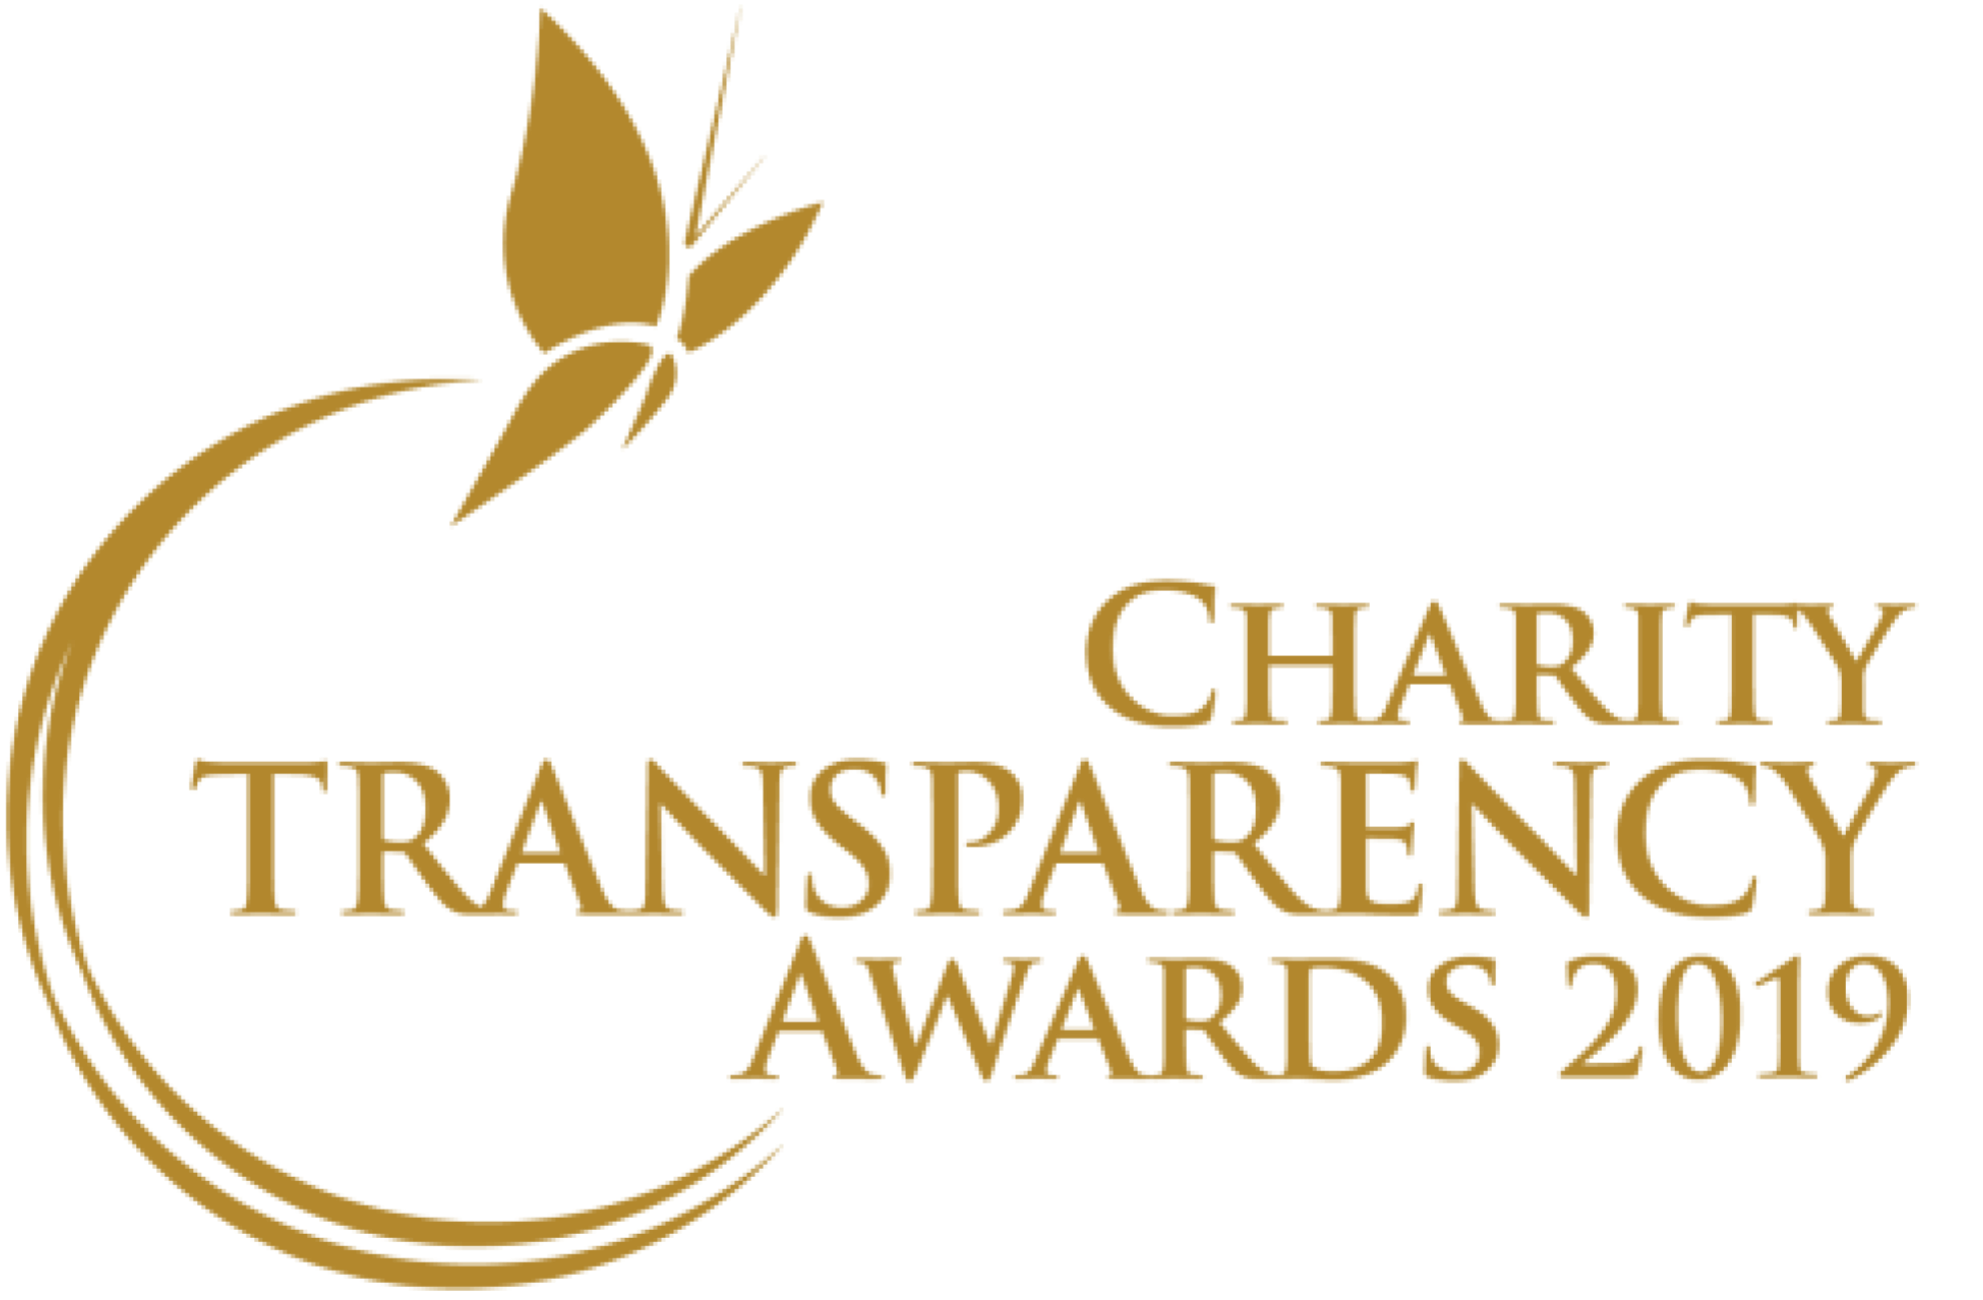 Charity Transparency Awards 2019